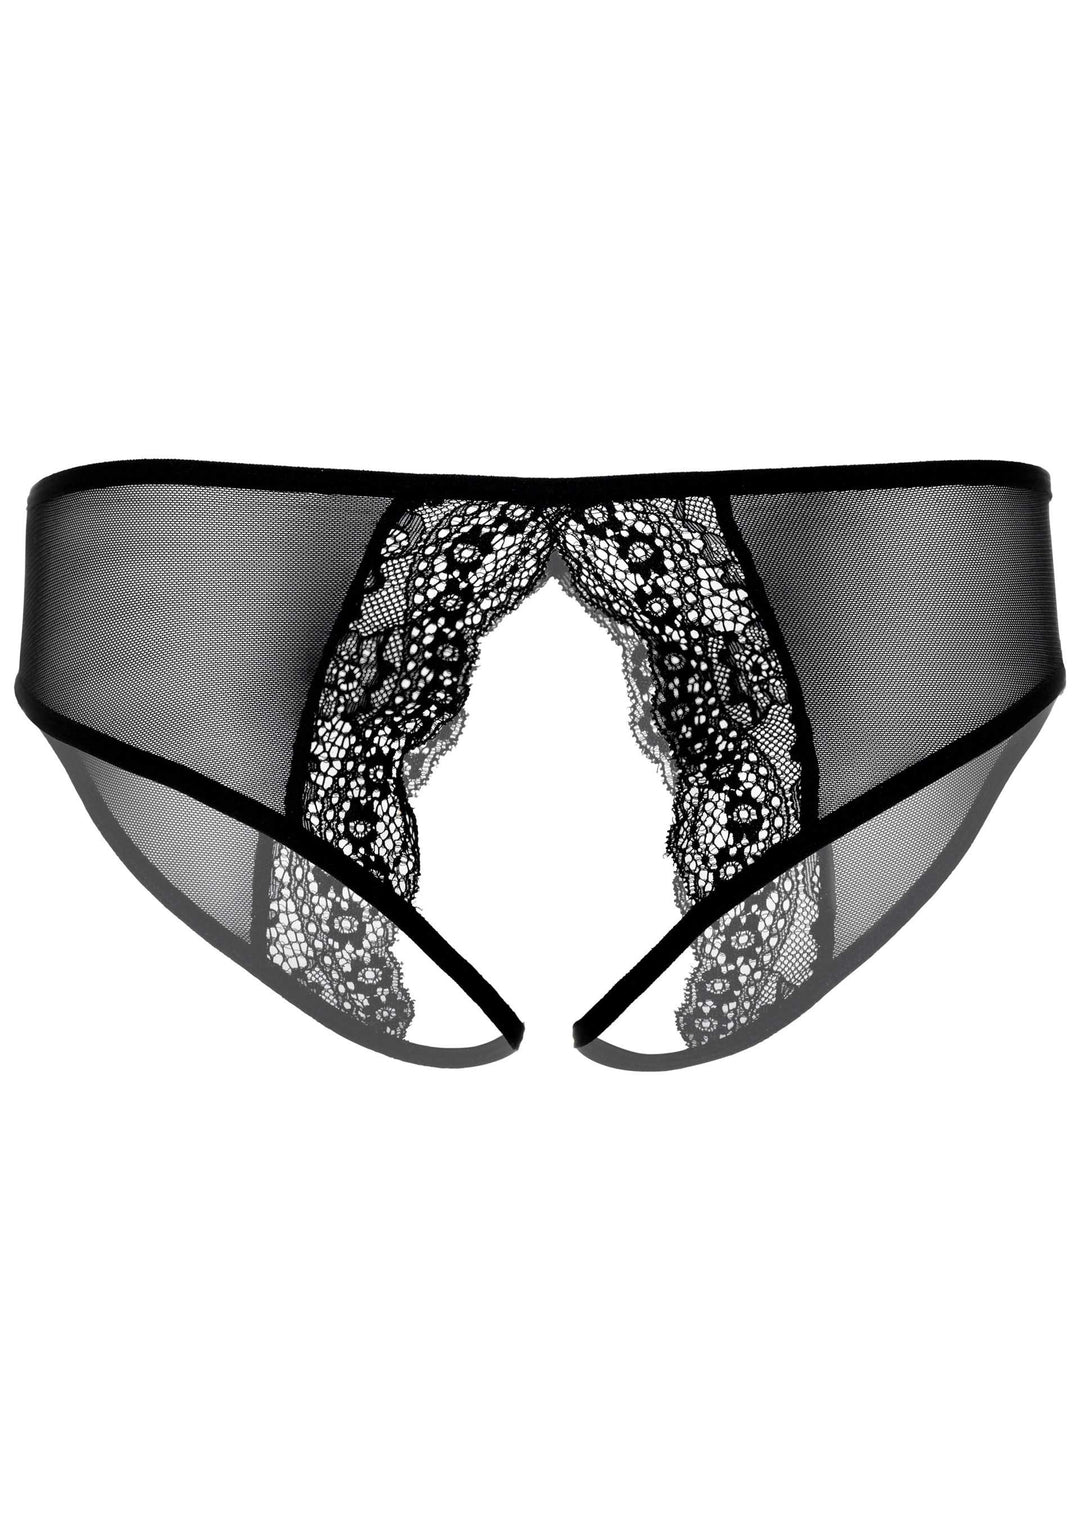 Slip donna con pizzo intimo aperto Angel naughty crotchless panty